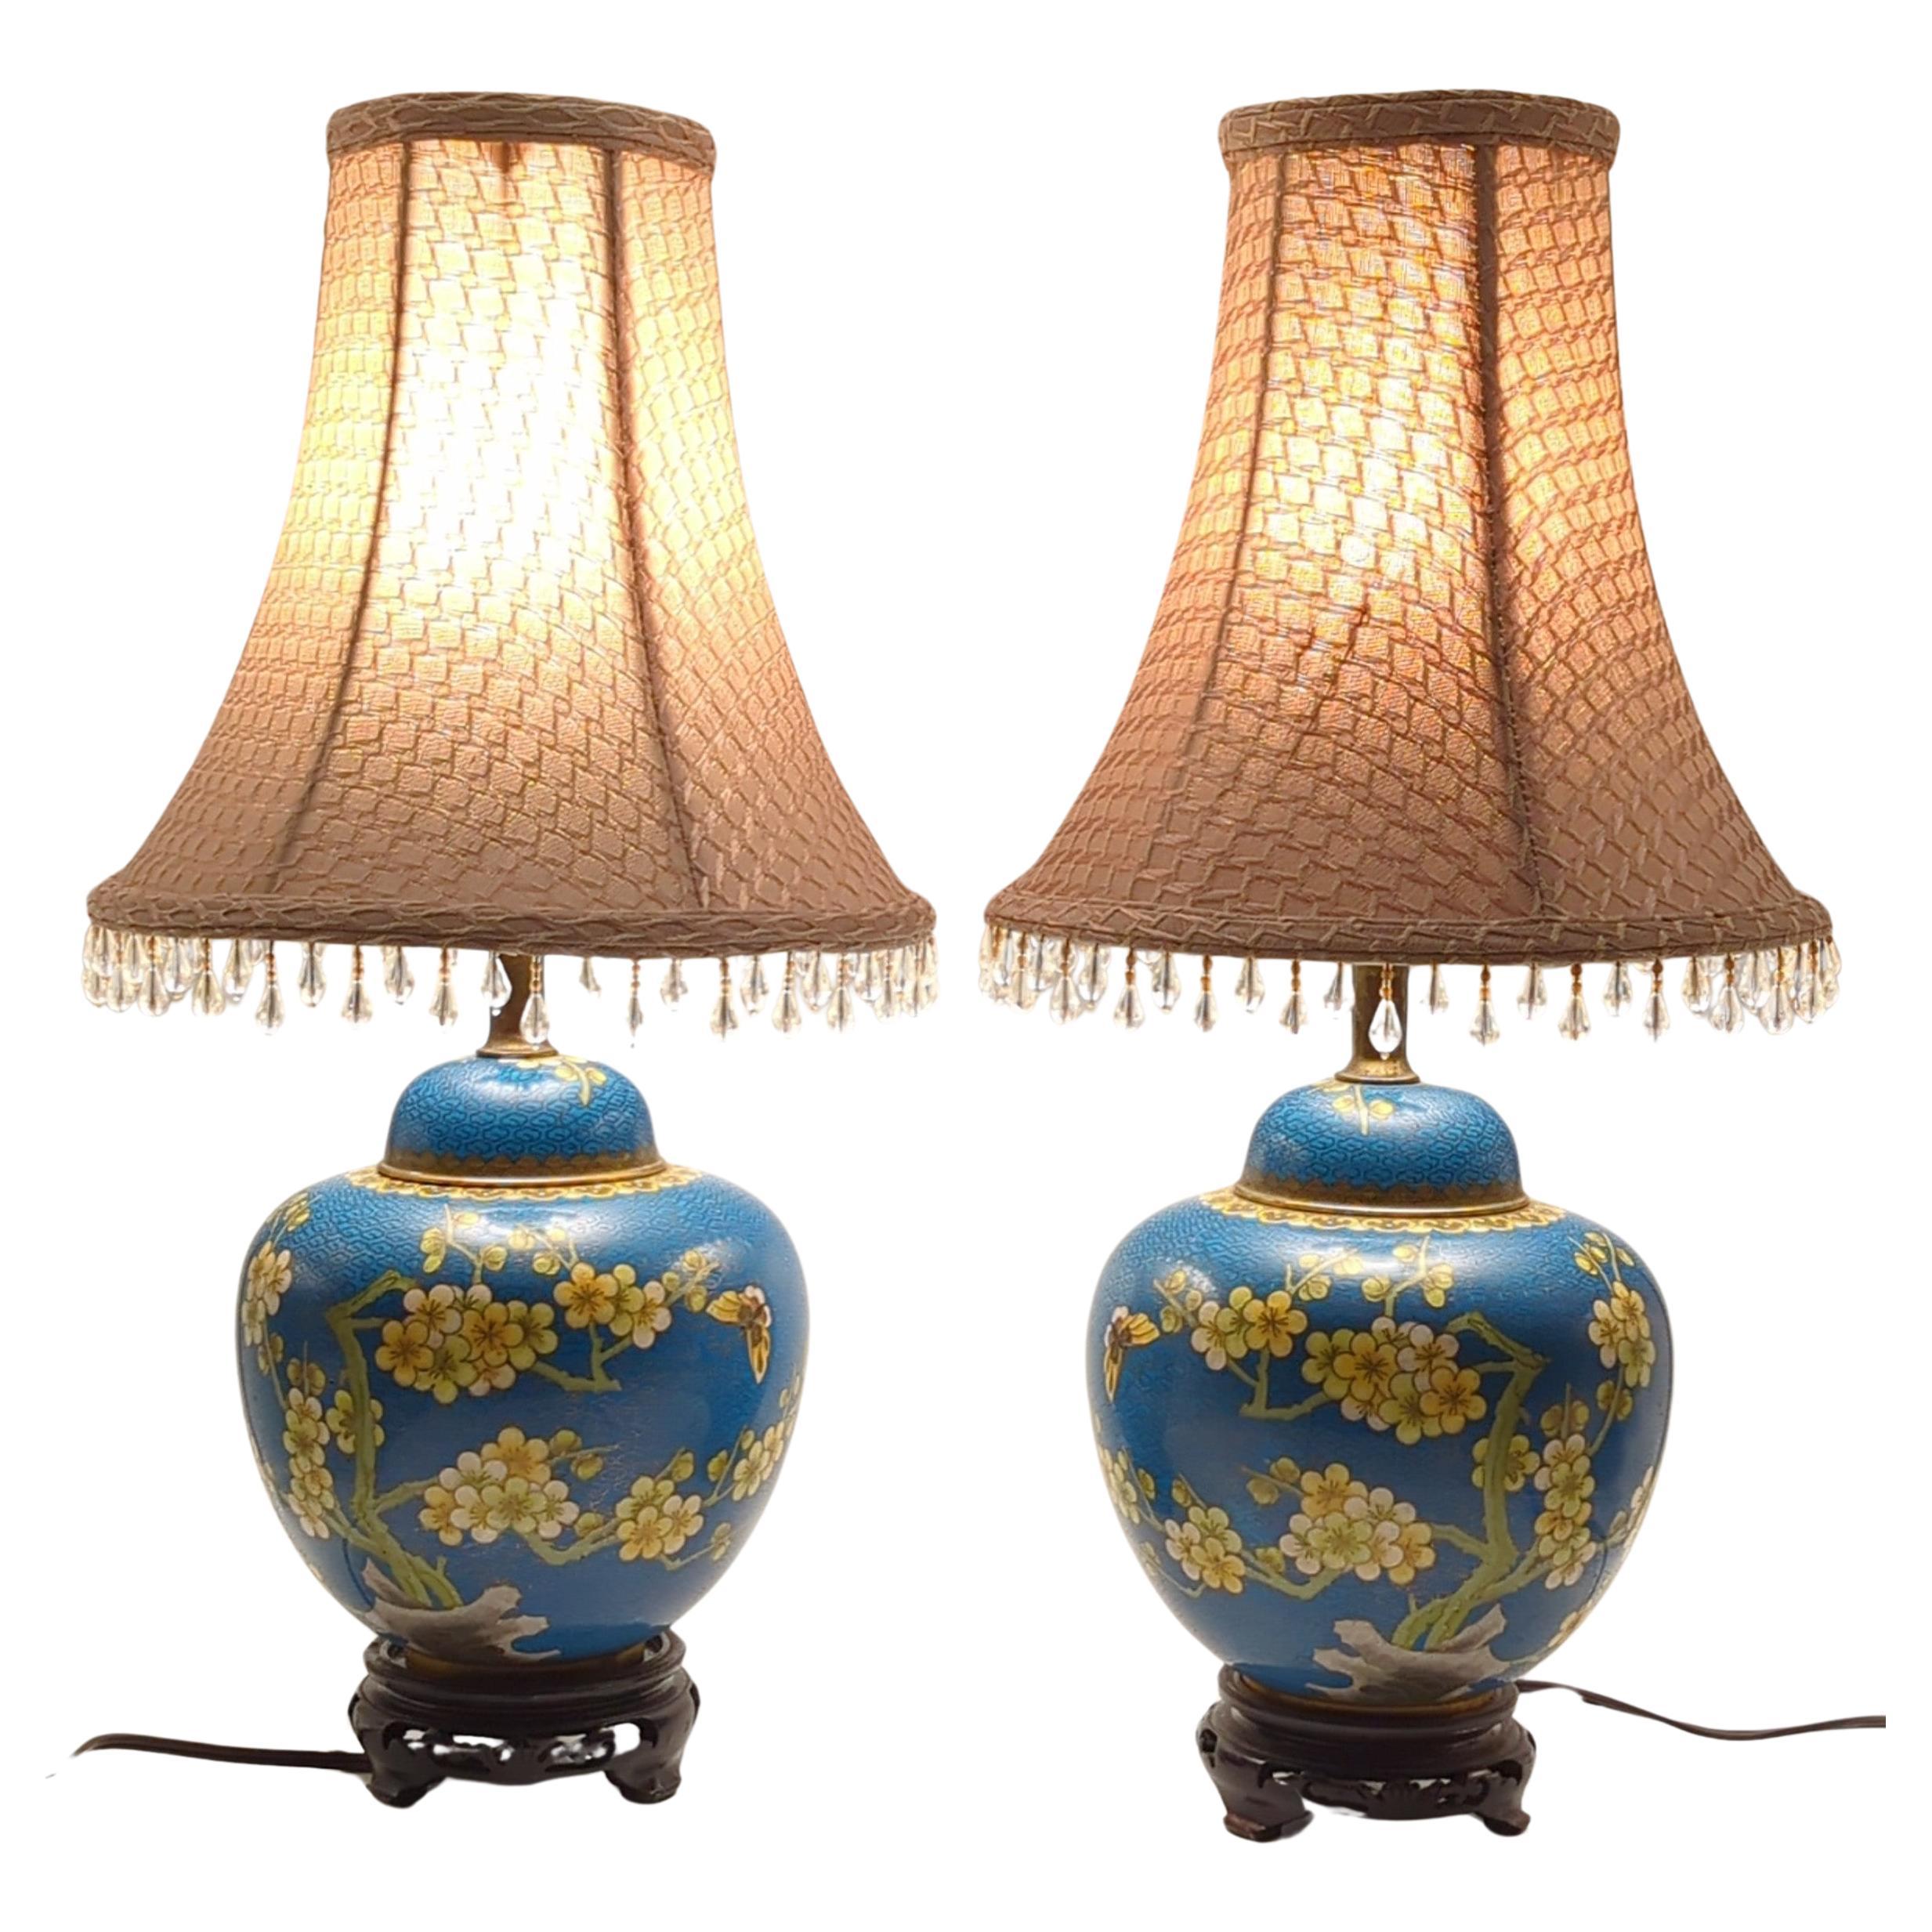 Pair Antique 19c Chinese Gilt Cloisonne Covered Prunus Ginger Jar Table Lamps